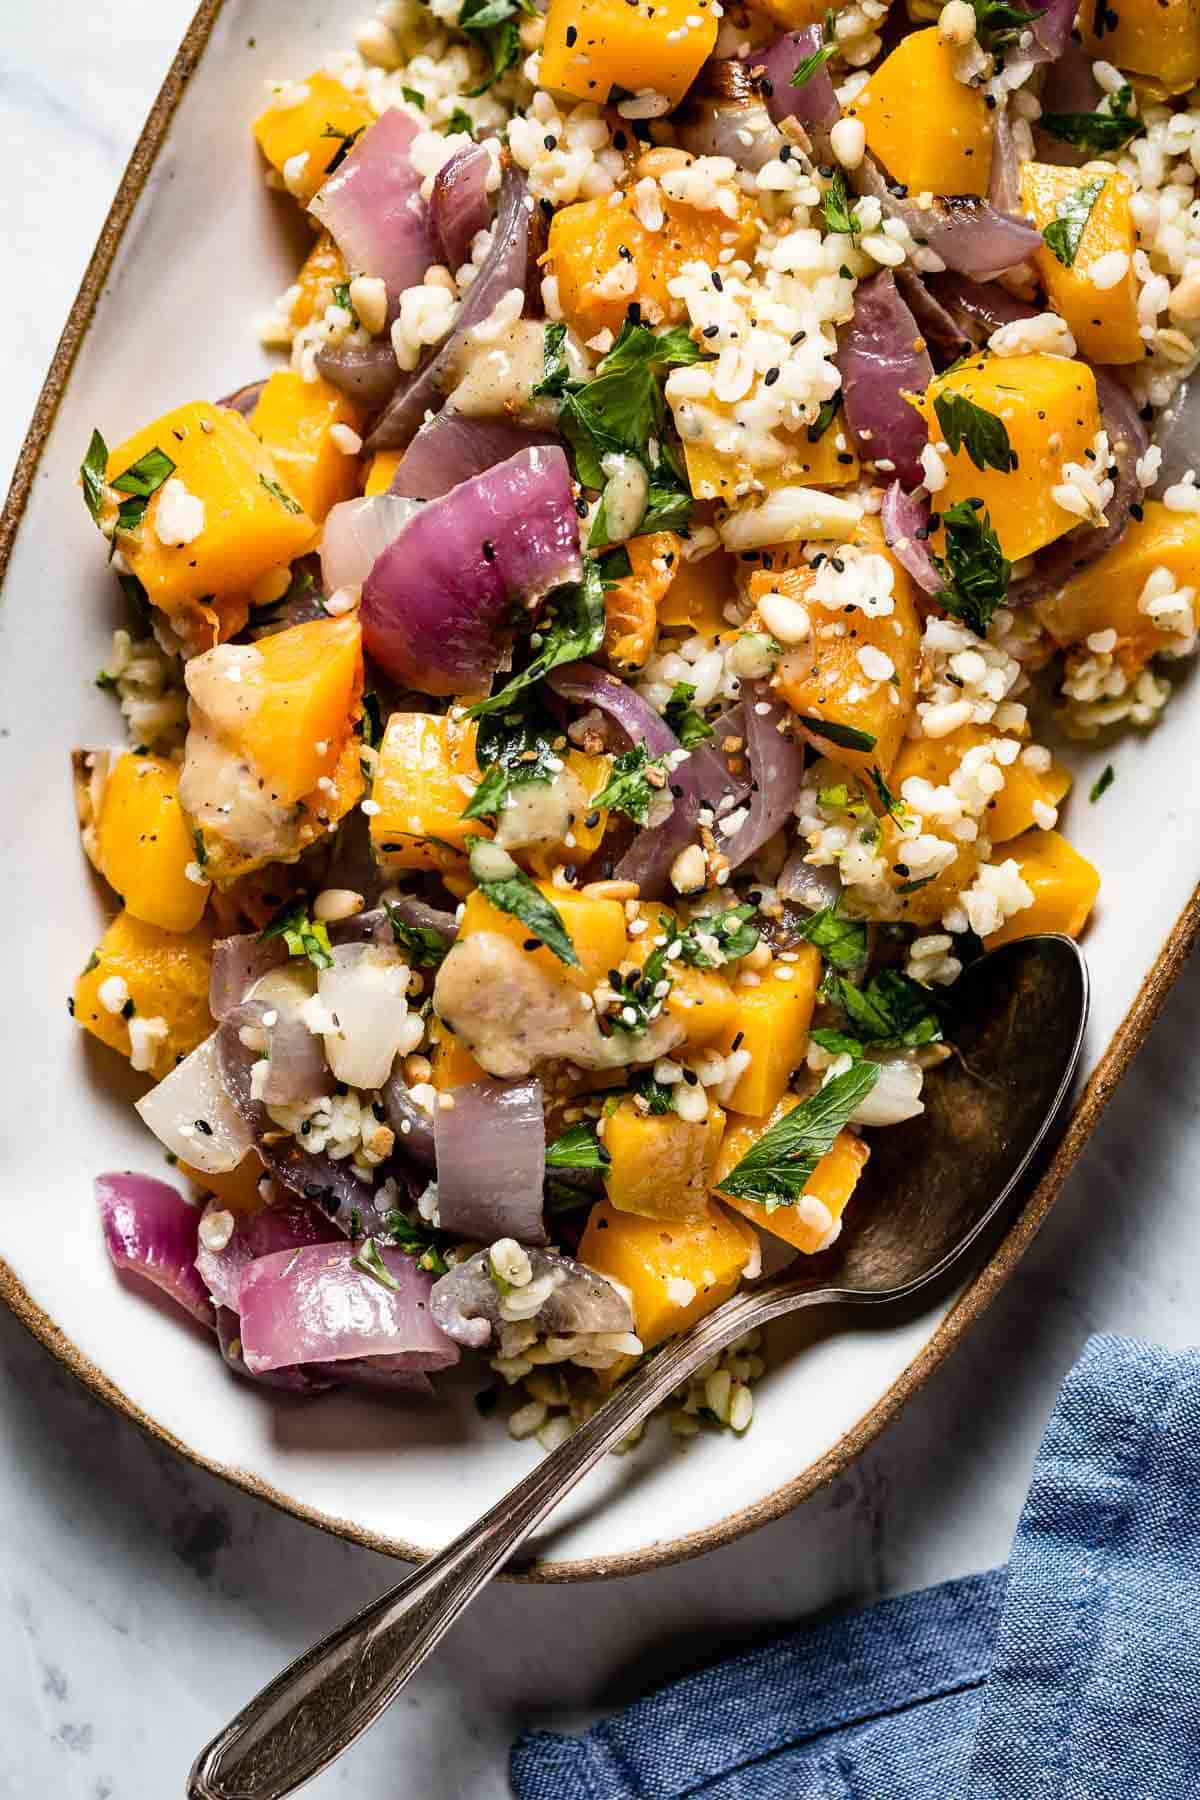 Butternut squash bulgur salad from the front view.